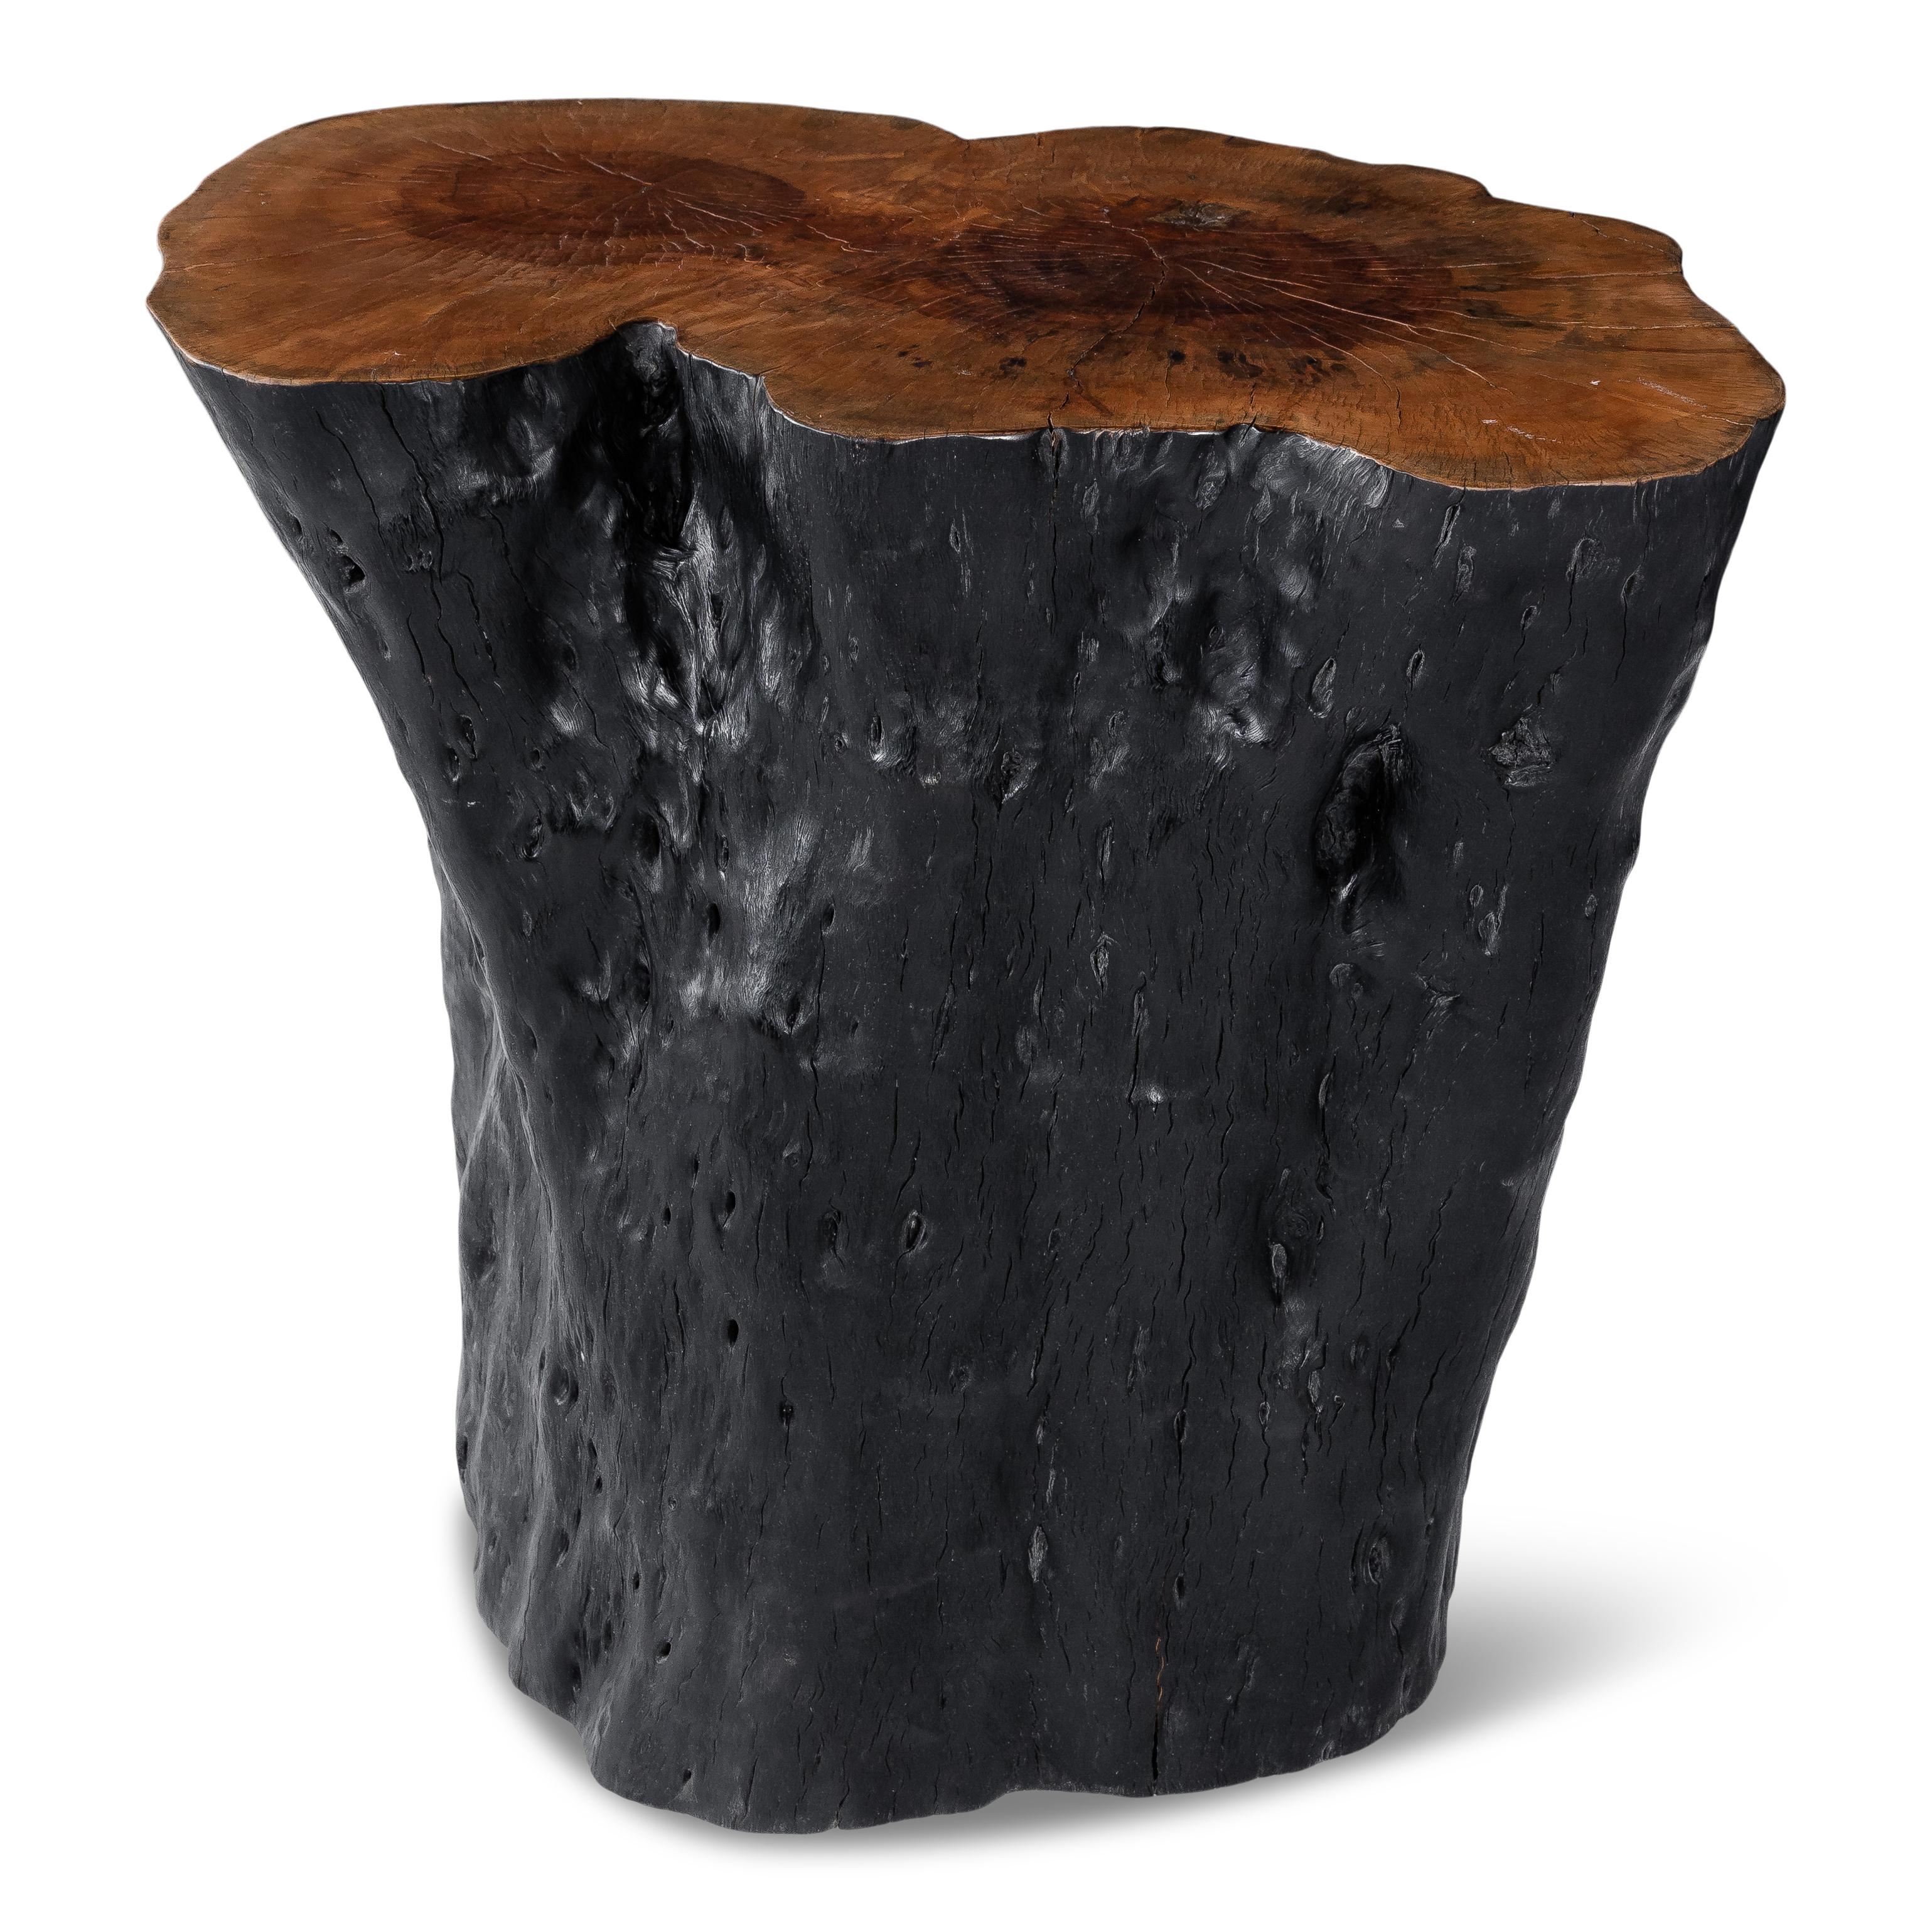 Lychee wood stump end table.

Piece from our one of kind collection, Le Monde. Exclusive to Brendan Bass. 


Globally curated by Brendan Bass, Le Monde furniture and accessories offer modern sensibility, provincial construction, and